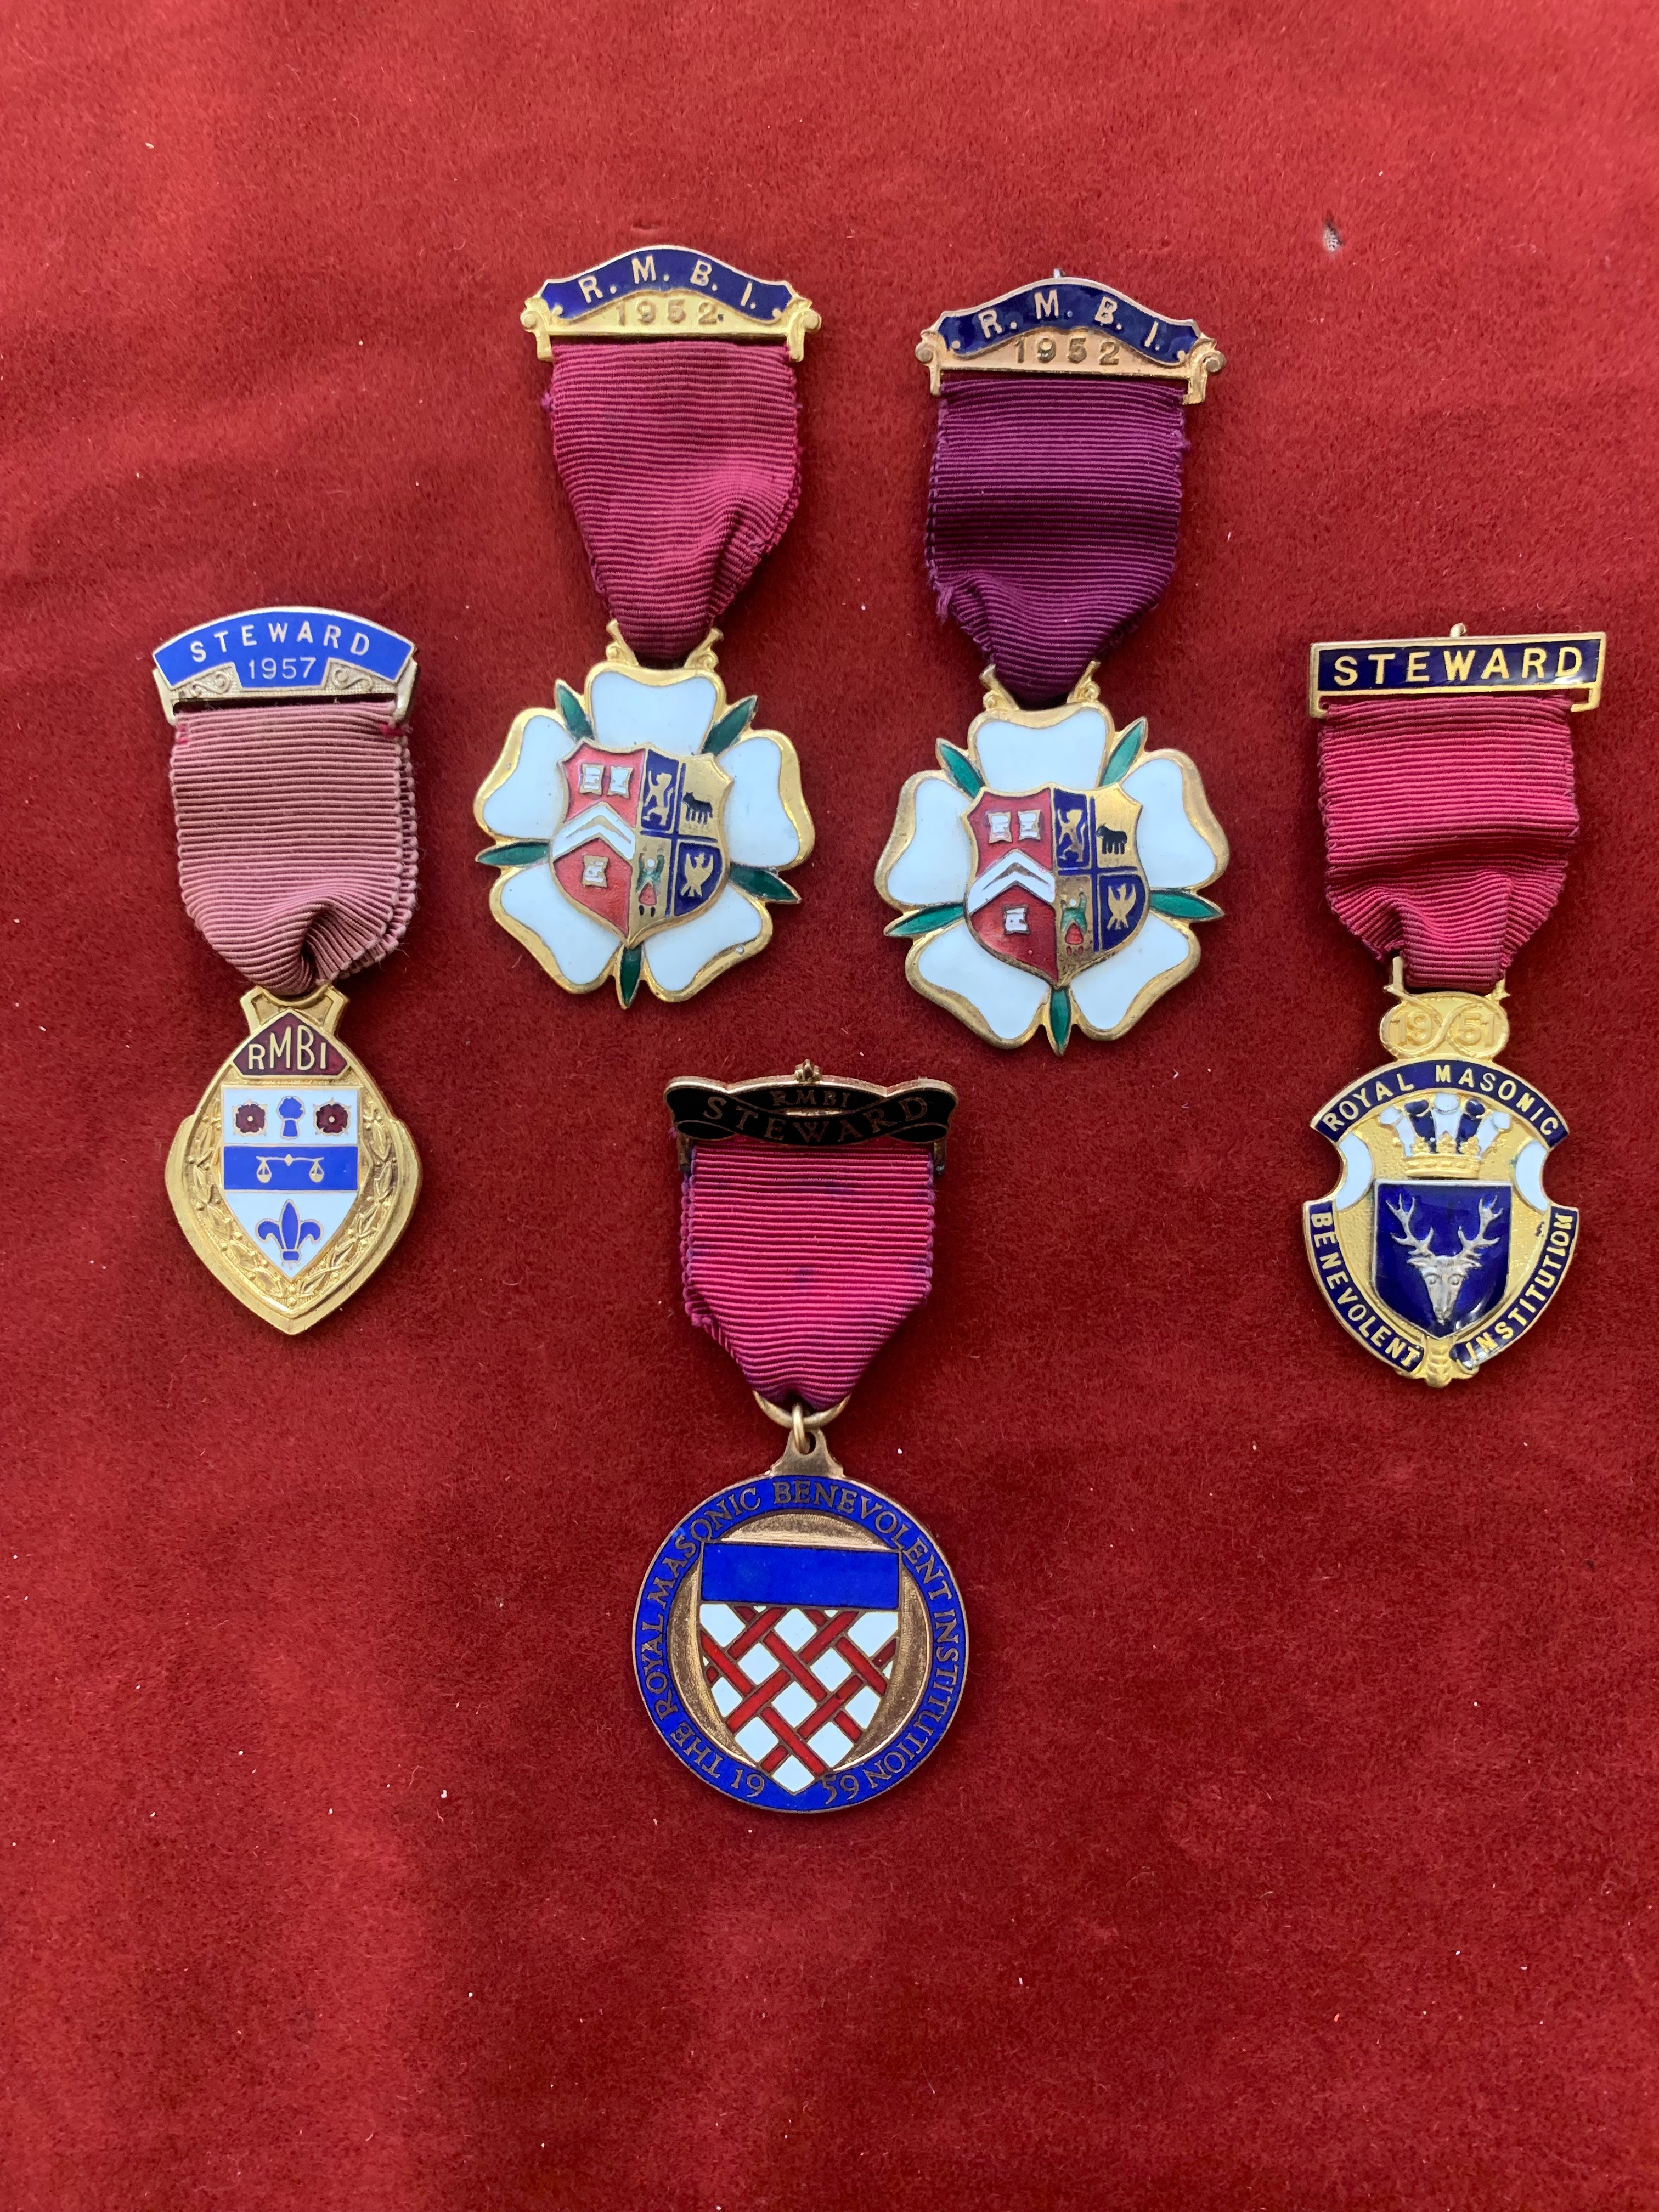 Royal Masonic Benevolent Institution Silver Jewels (5) including dates 1951, two 1952, 1957 and